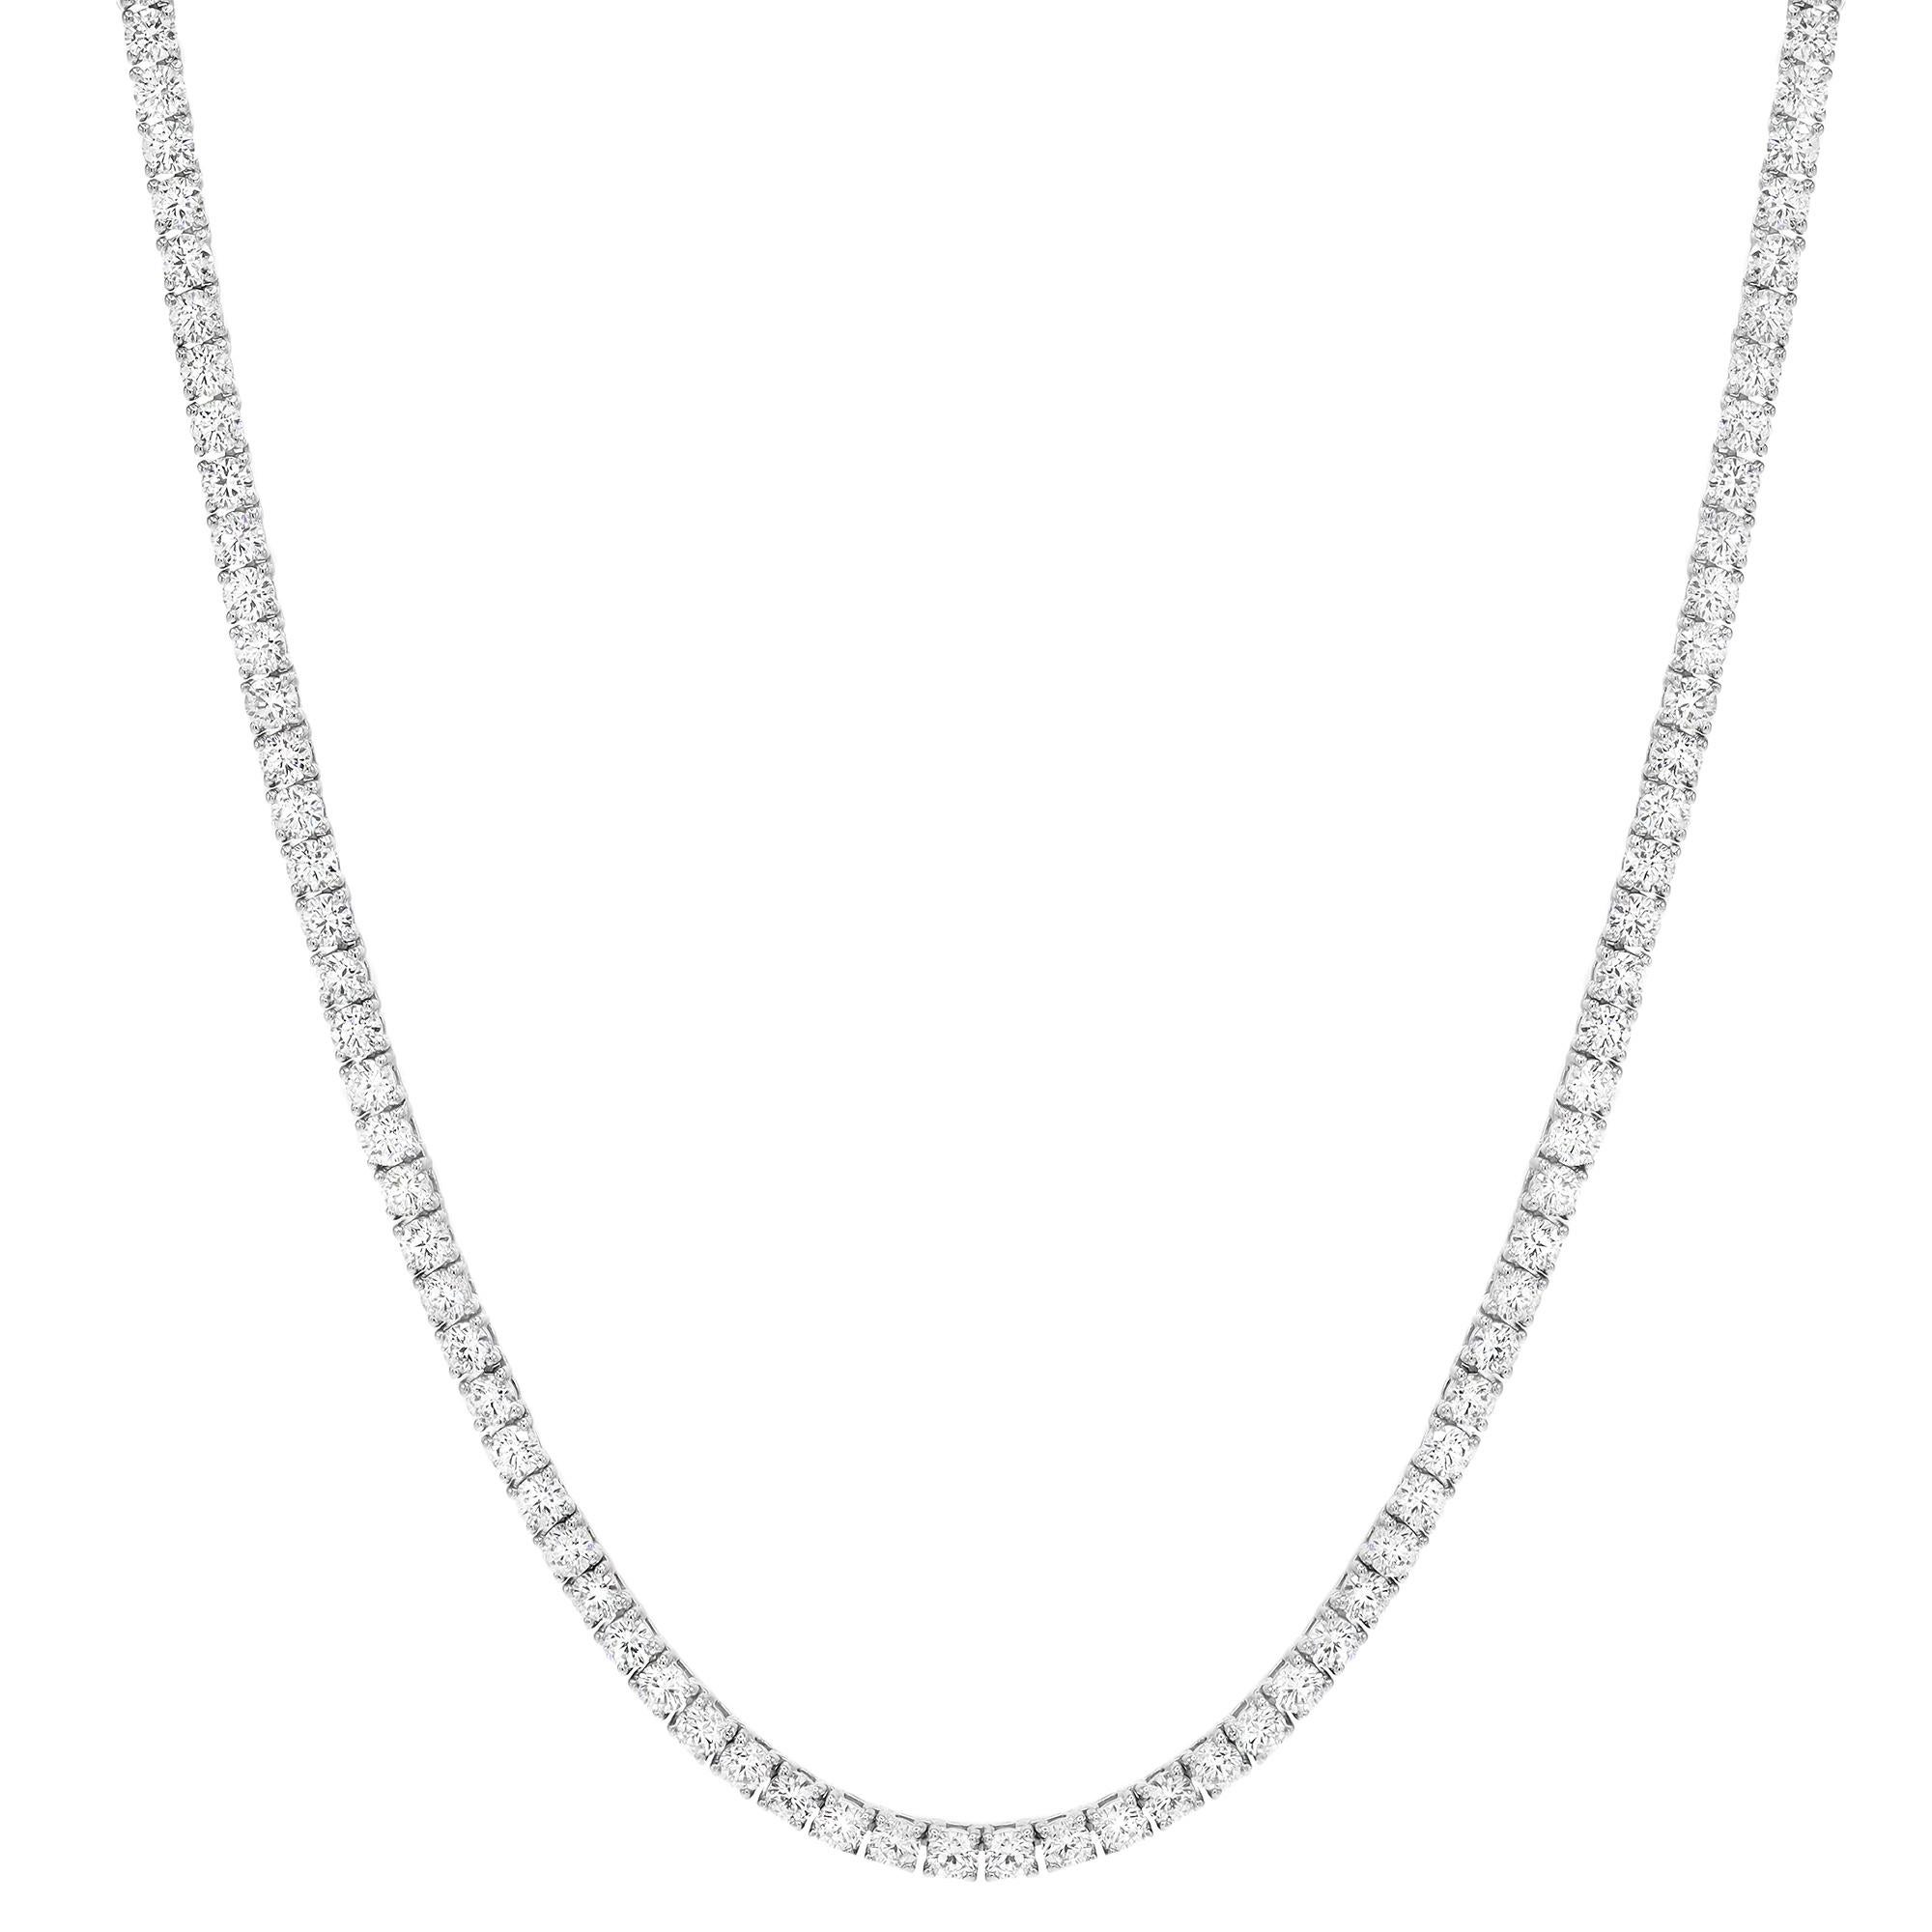 A classic diamond single line tennis necklace is an iconic essential that always remains in fashion. This elegant and alluring necklace features 153, 0.09pt prong set bright white round brilliant cut diamonds weighing 13.63 carats in total. Diamond